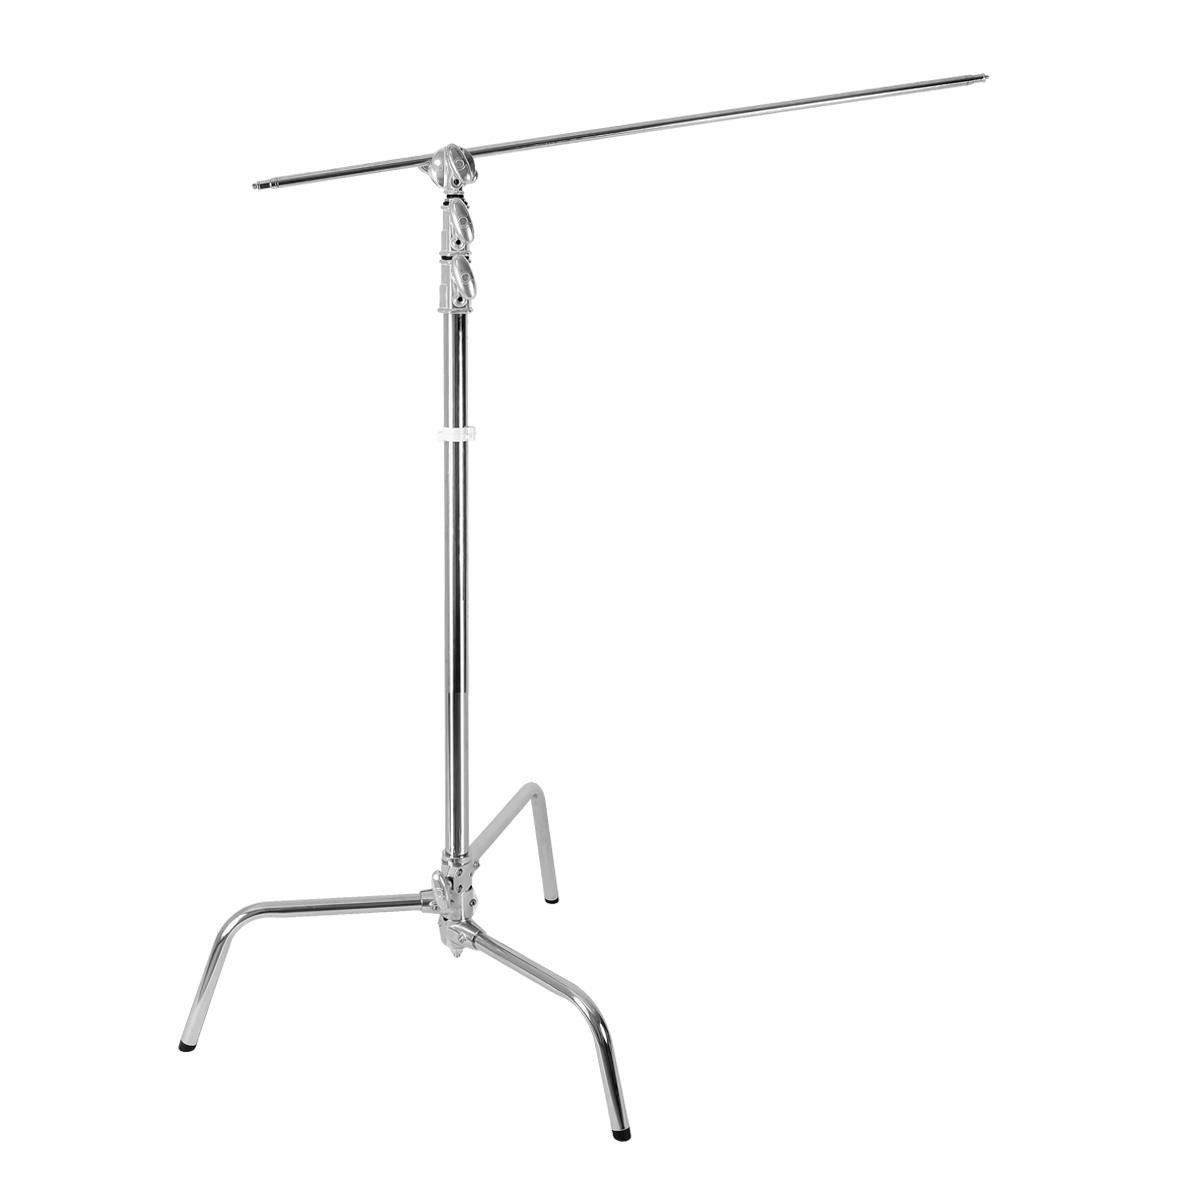 Godox 240CS C-Stand with 33" Arm & Grip Head, 10kg Max Load Capacity, and Up to 2.4m Max Height for Photography Supporting Gear (Silver)